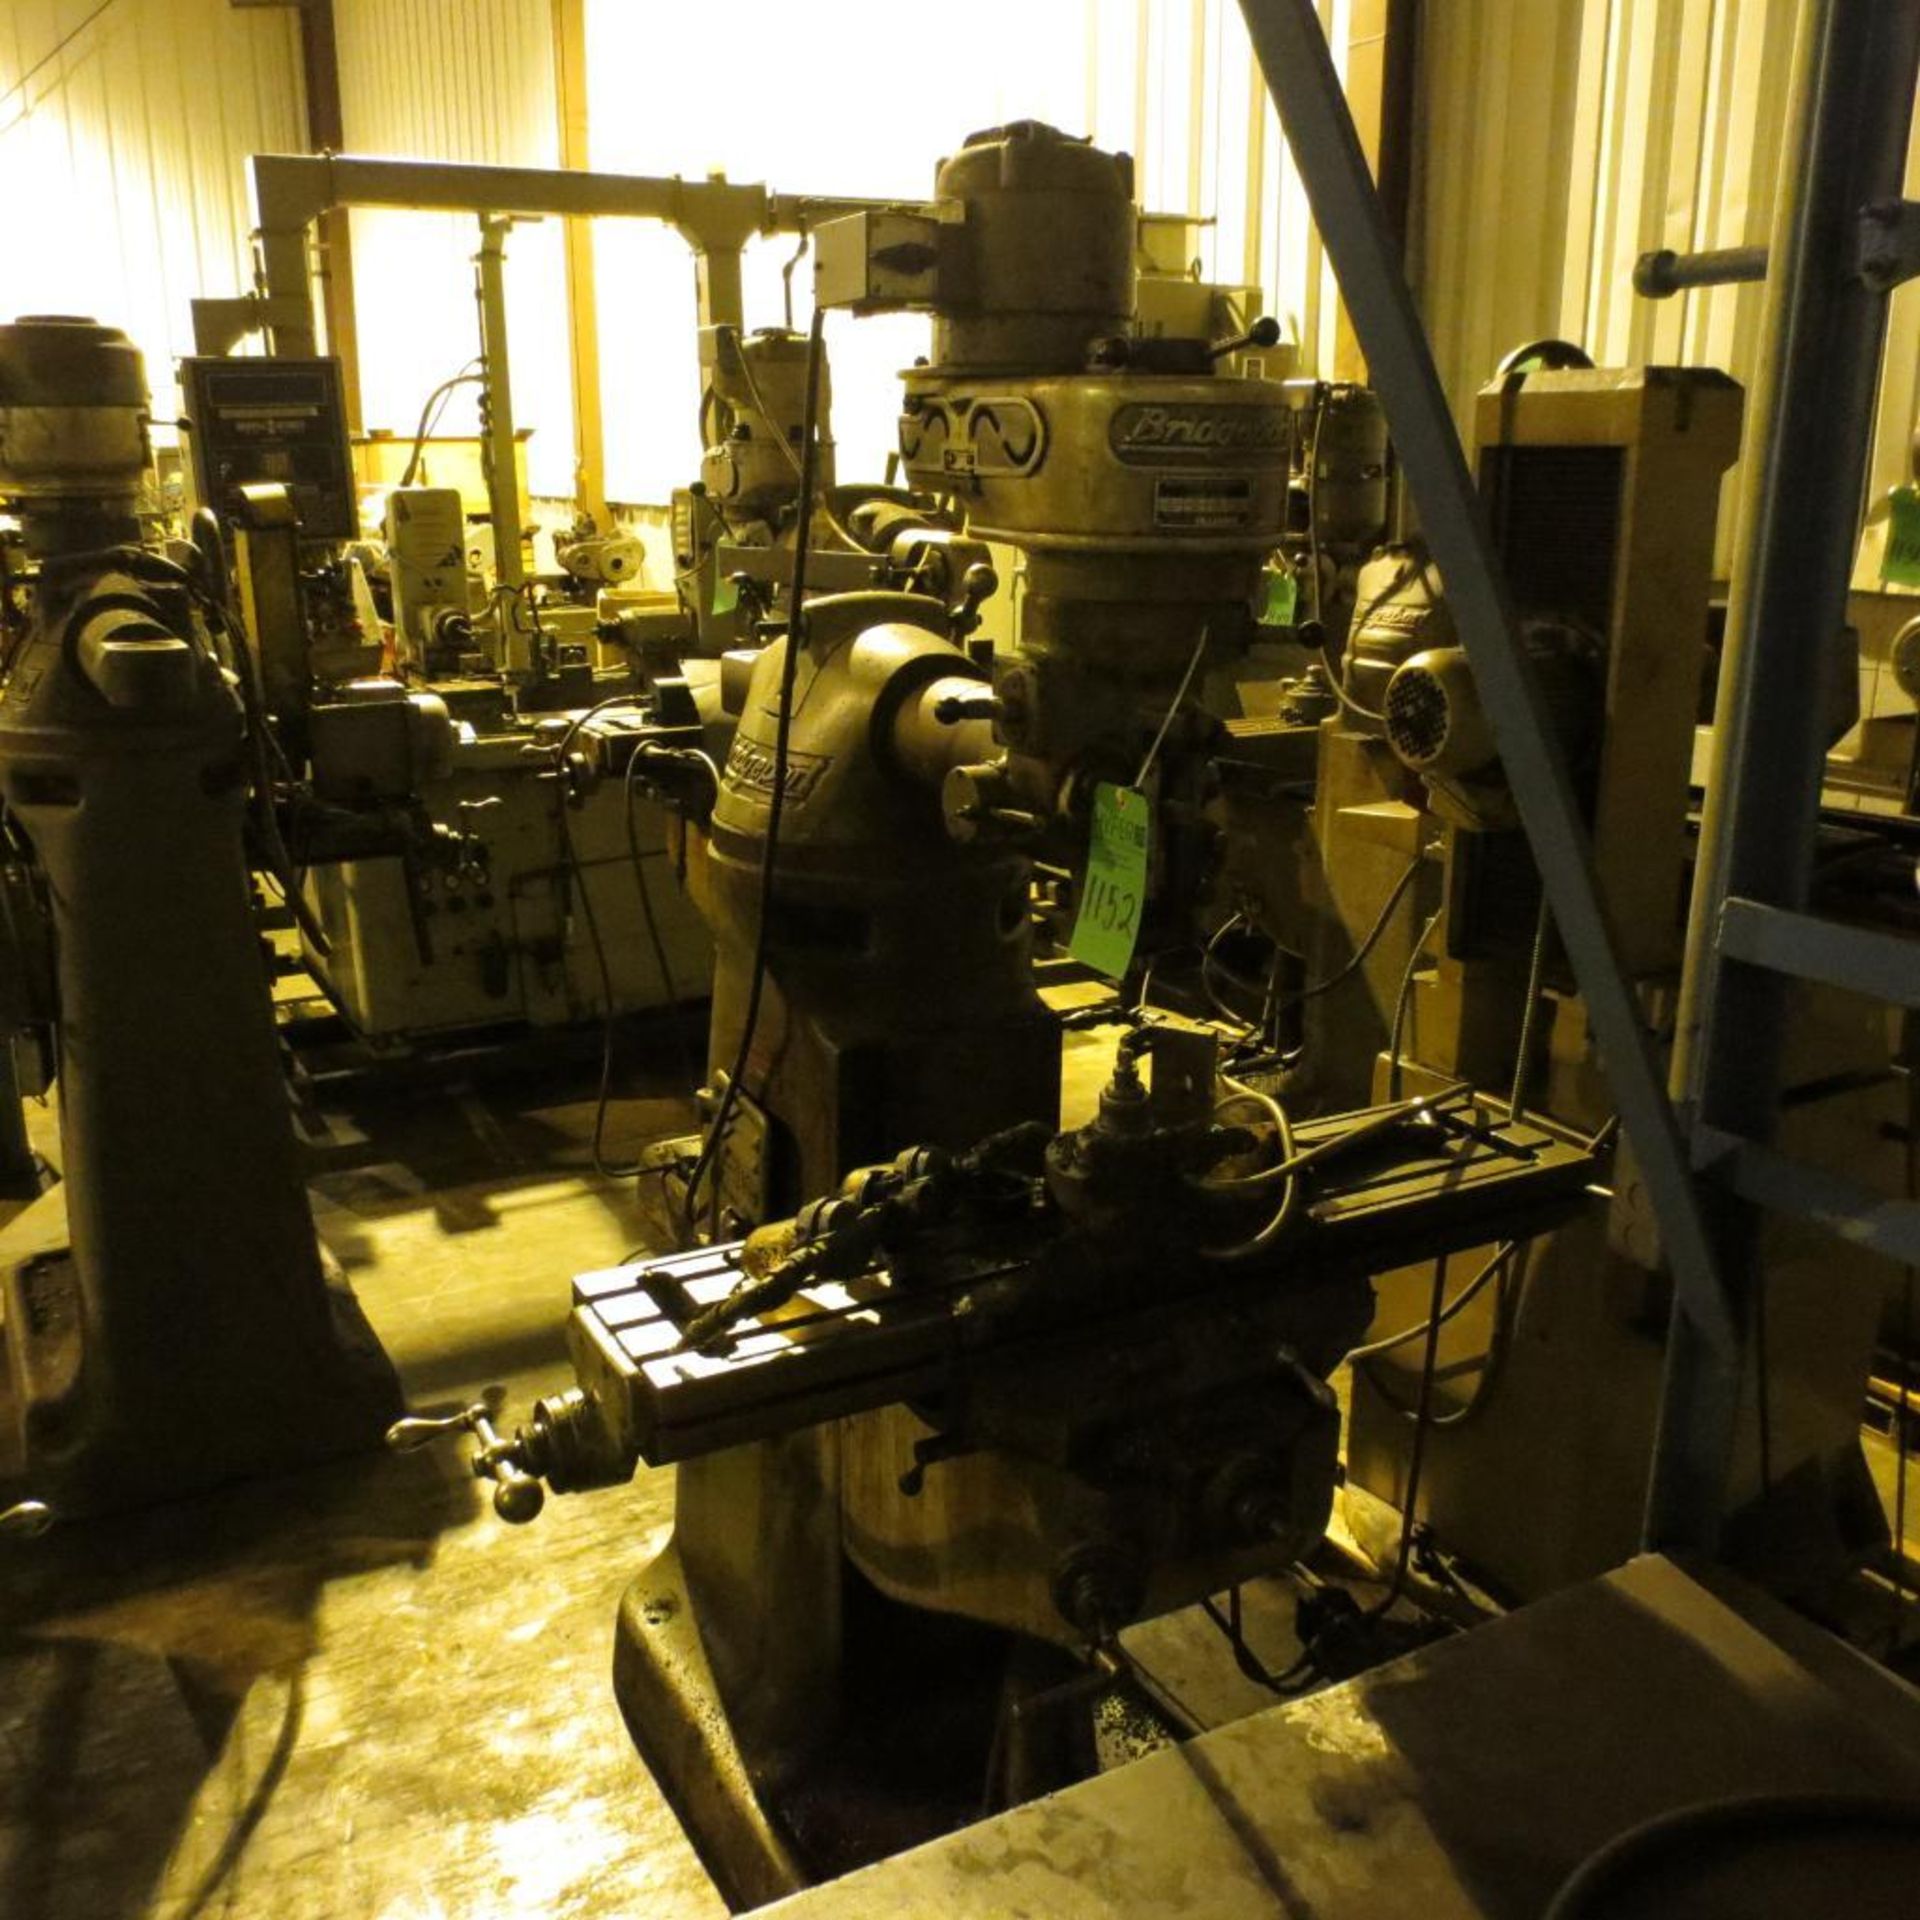 Bridgeport Vertical Milling Machine, 49"x9" Slotted Table, S/N 19604 *RIGGING $65* - Image 2 of 5